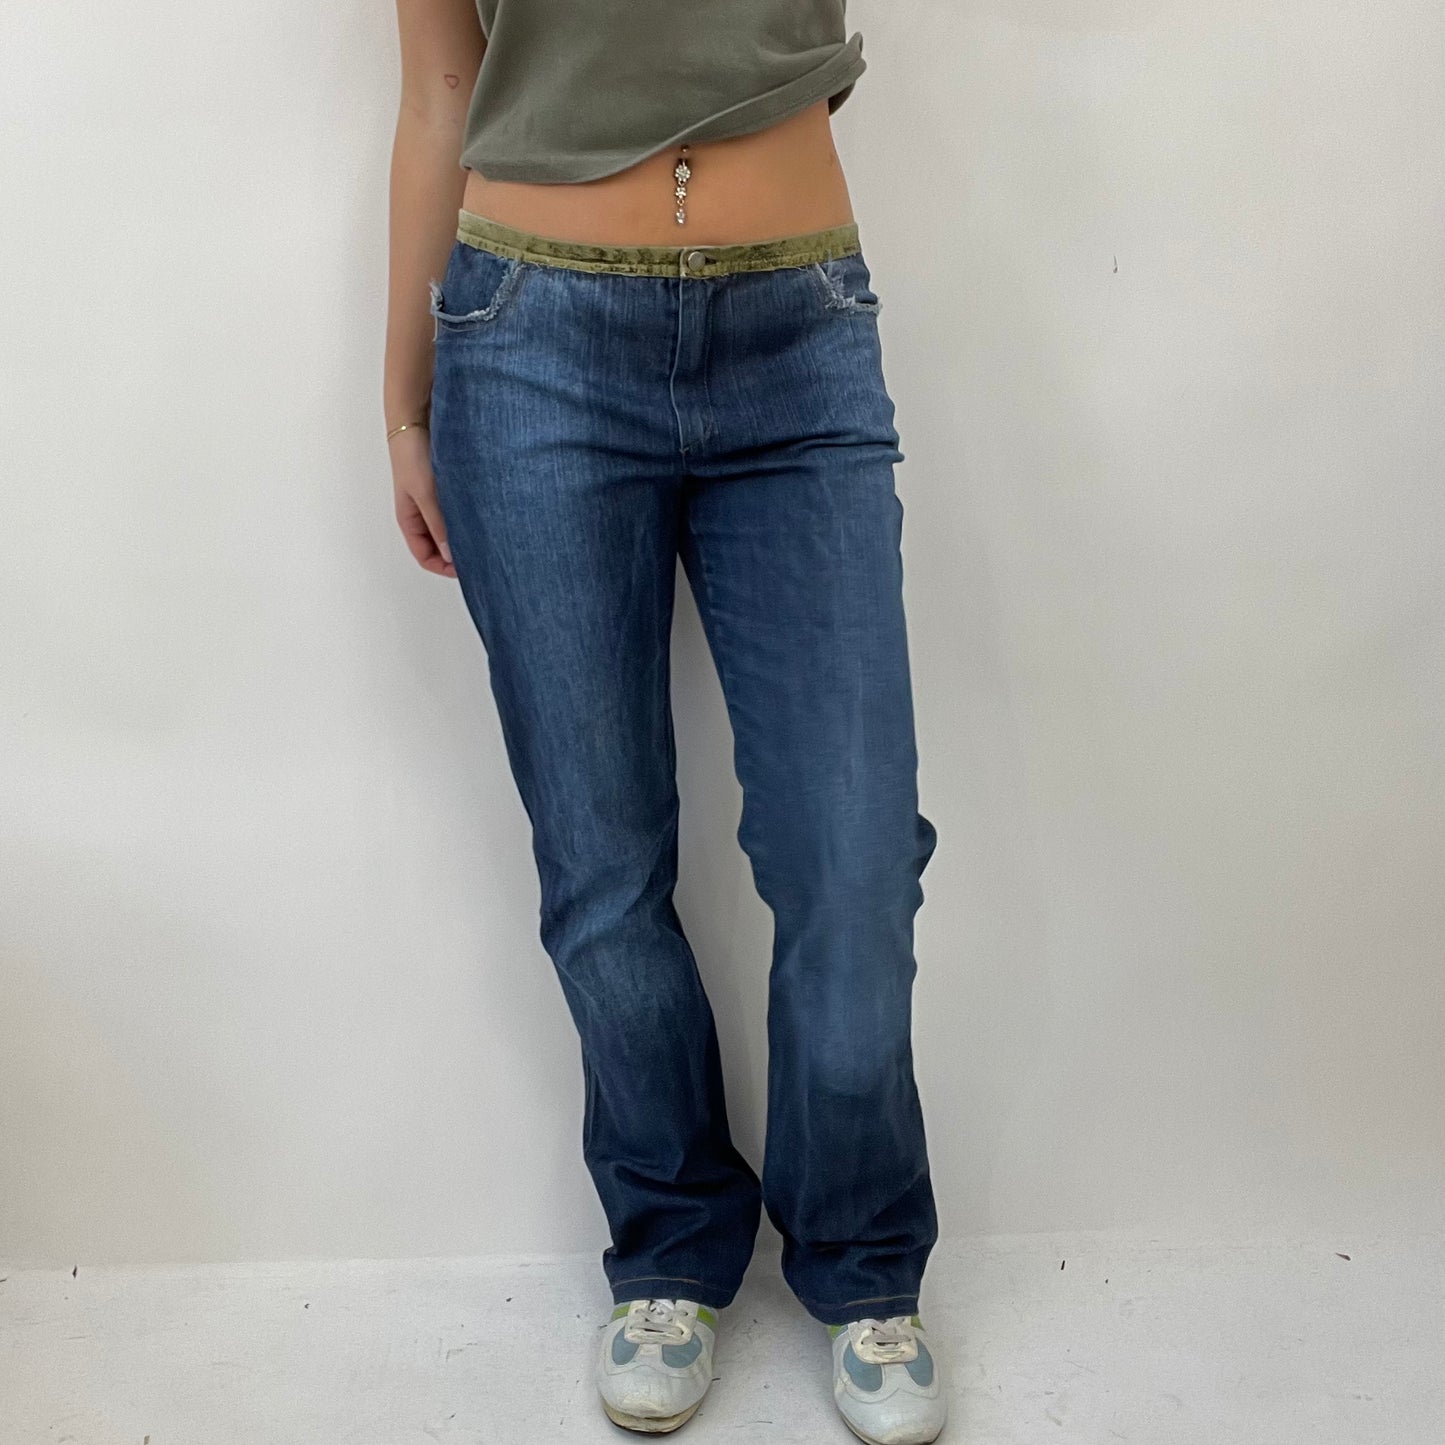 COTTAGECORE DROP | small dark blue jeans with green patterned patches